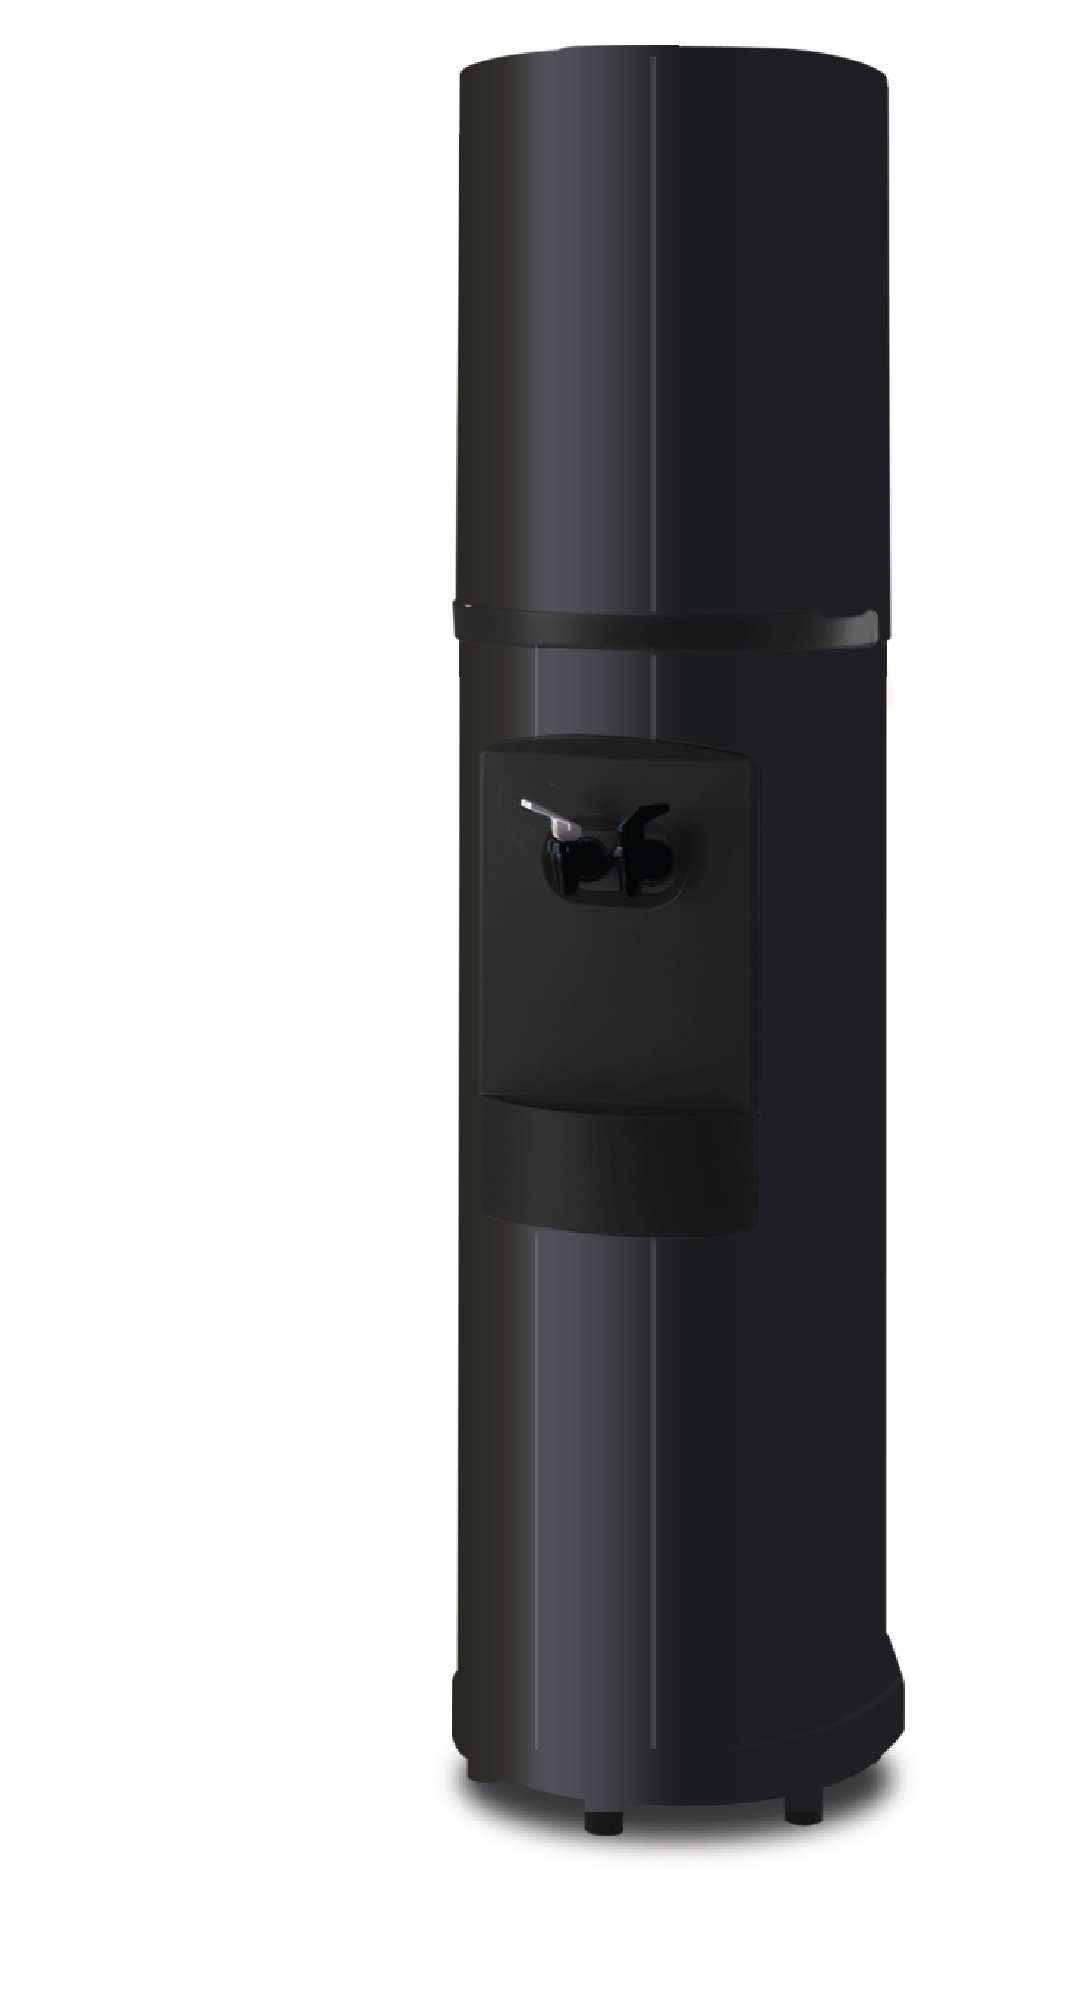 Fahrenheit Water Cooler -Black with Black Trim Kit - RoomTemp/Cold